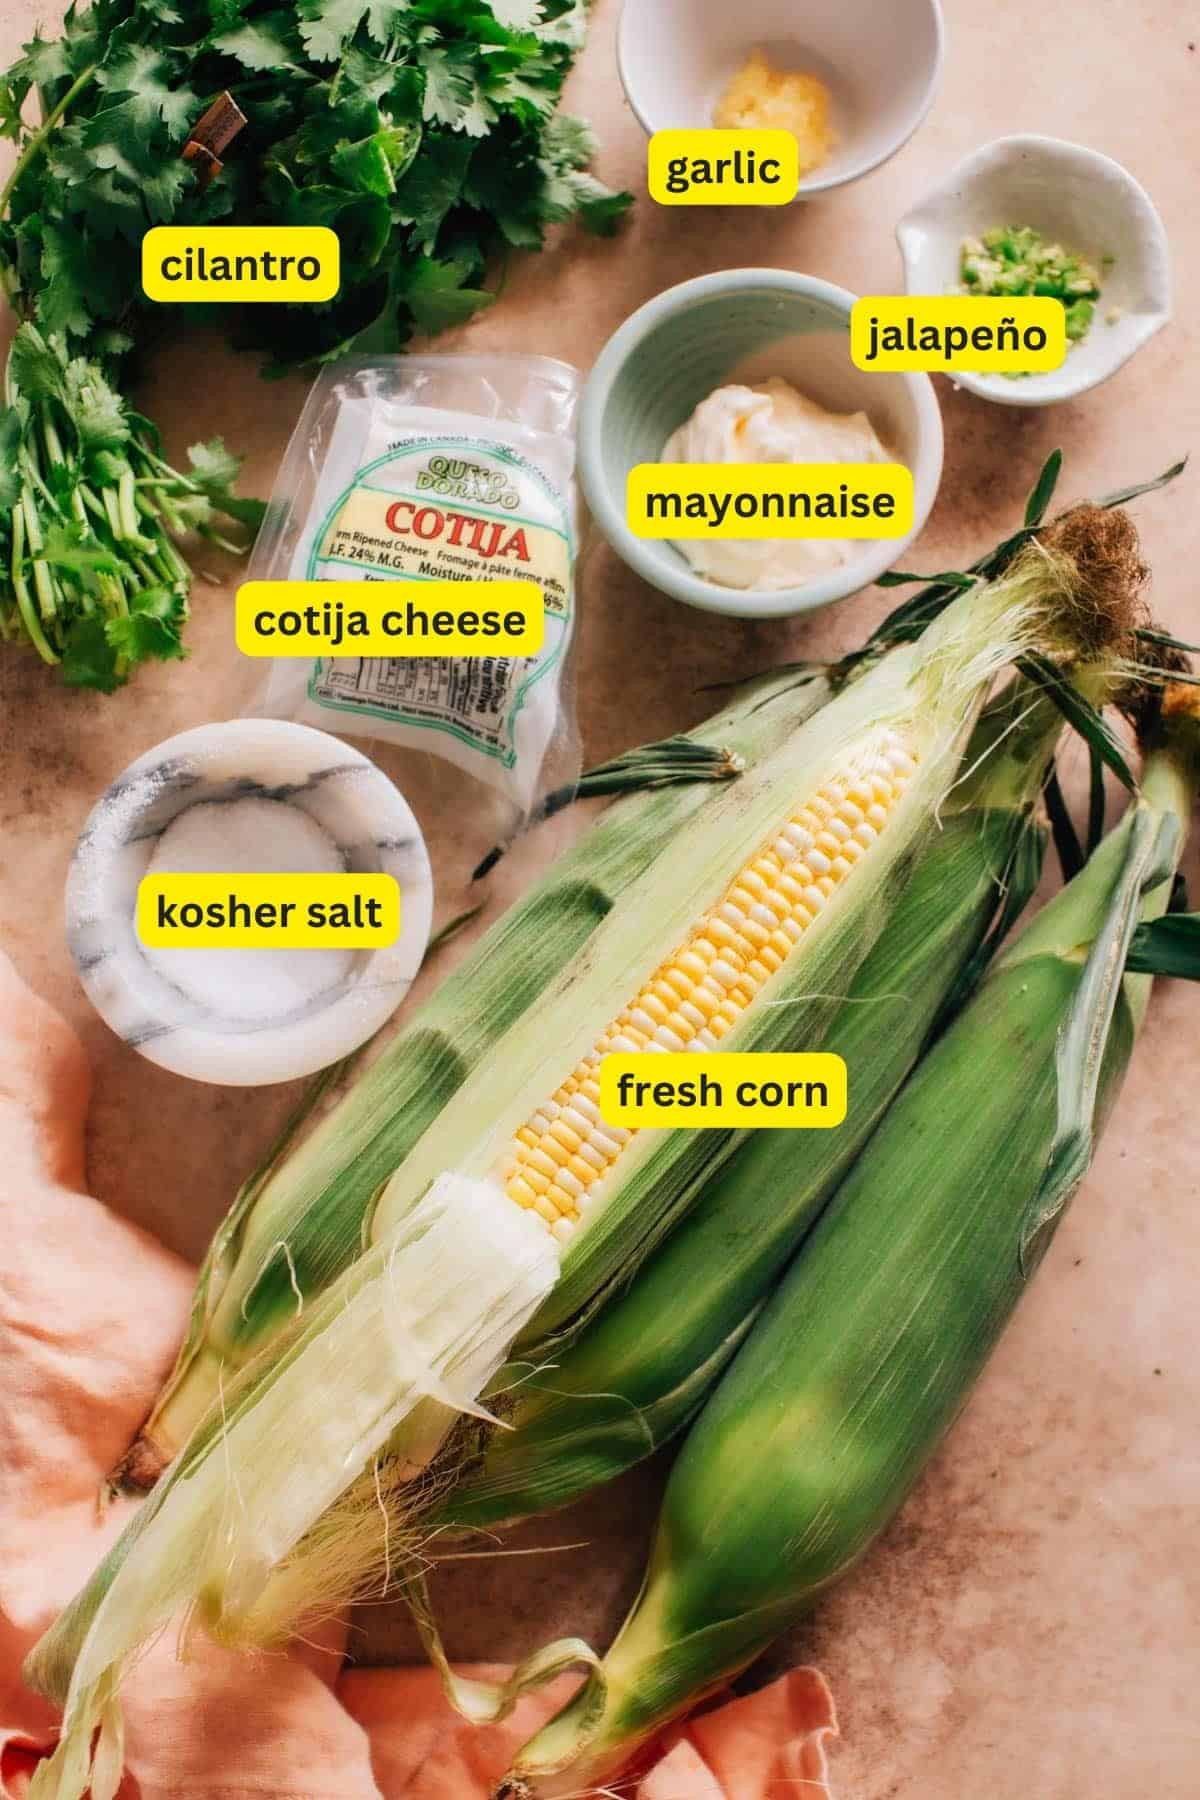 Ingredients for Mexican Corn in Cup Street Corn Salad (Esquites) arranged on a kitchen countertop, including cilantro, garlic, jalapeno, Cotija cheese, kosher salt, mayonnaise, and fresh corn.